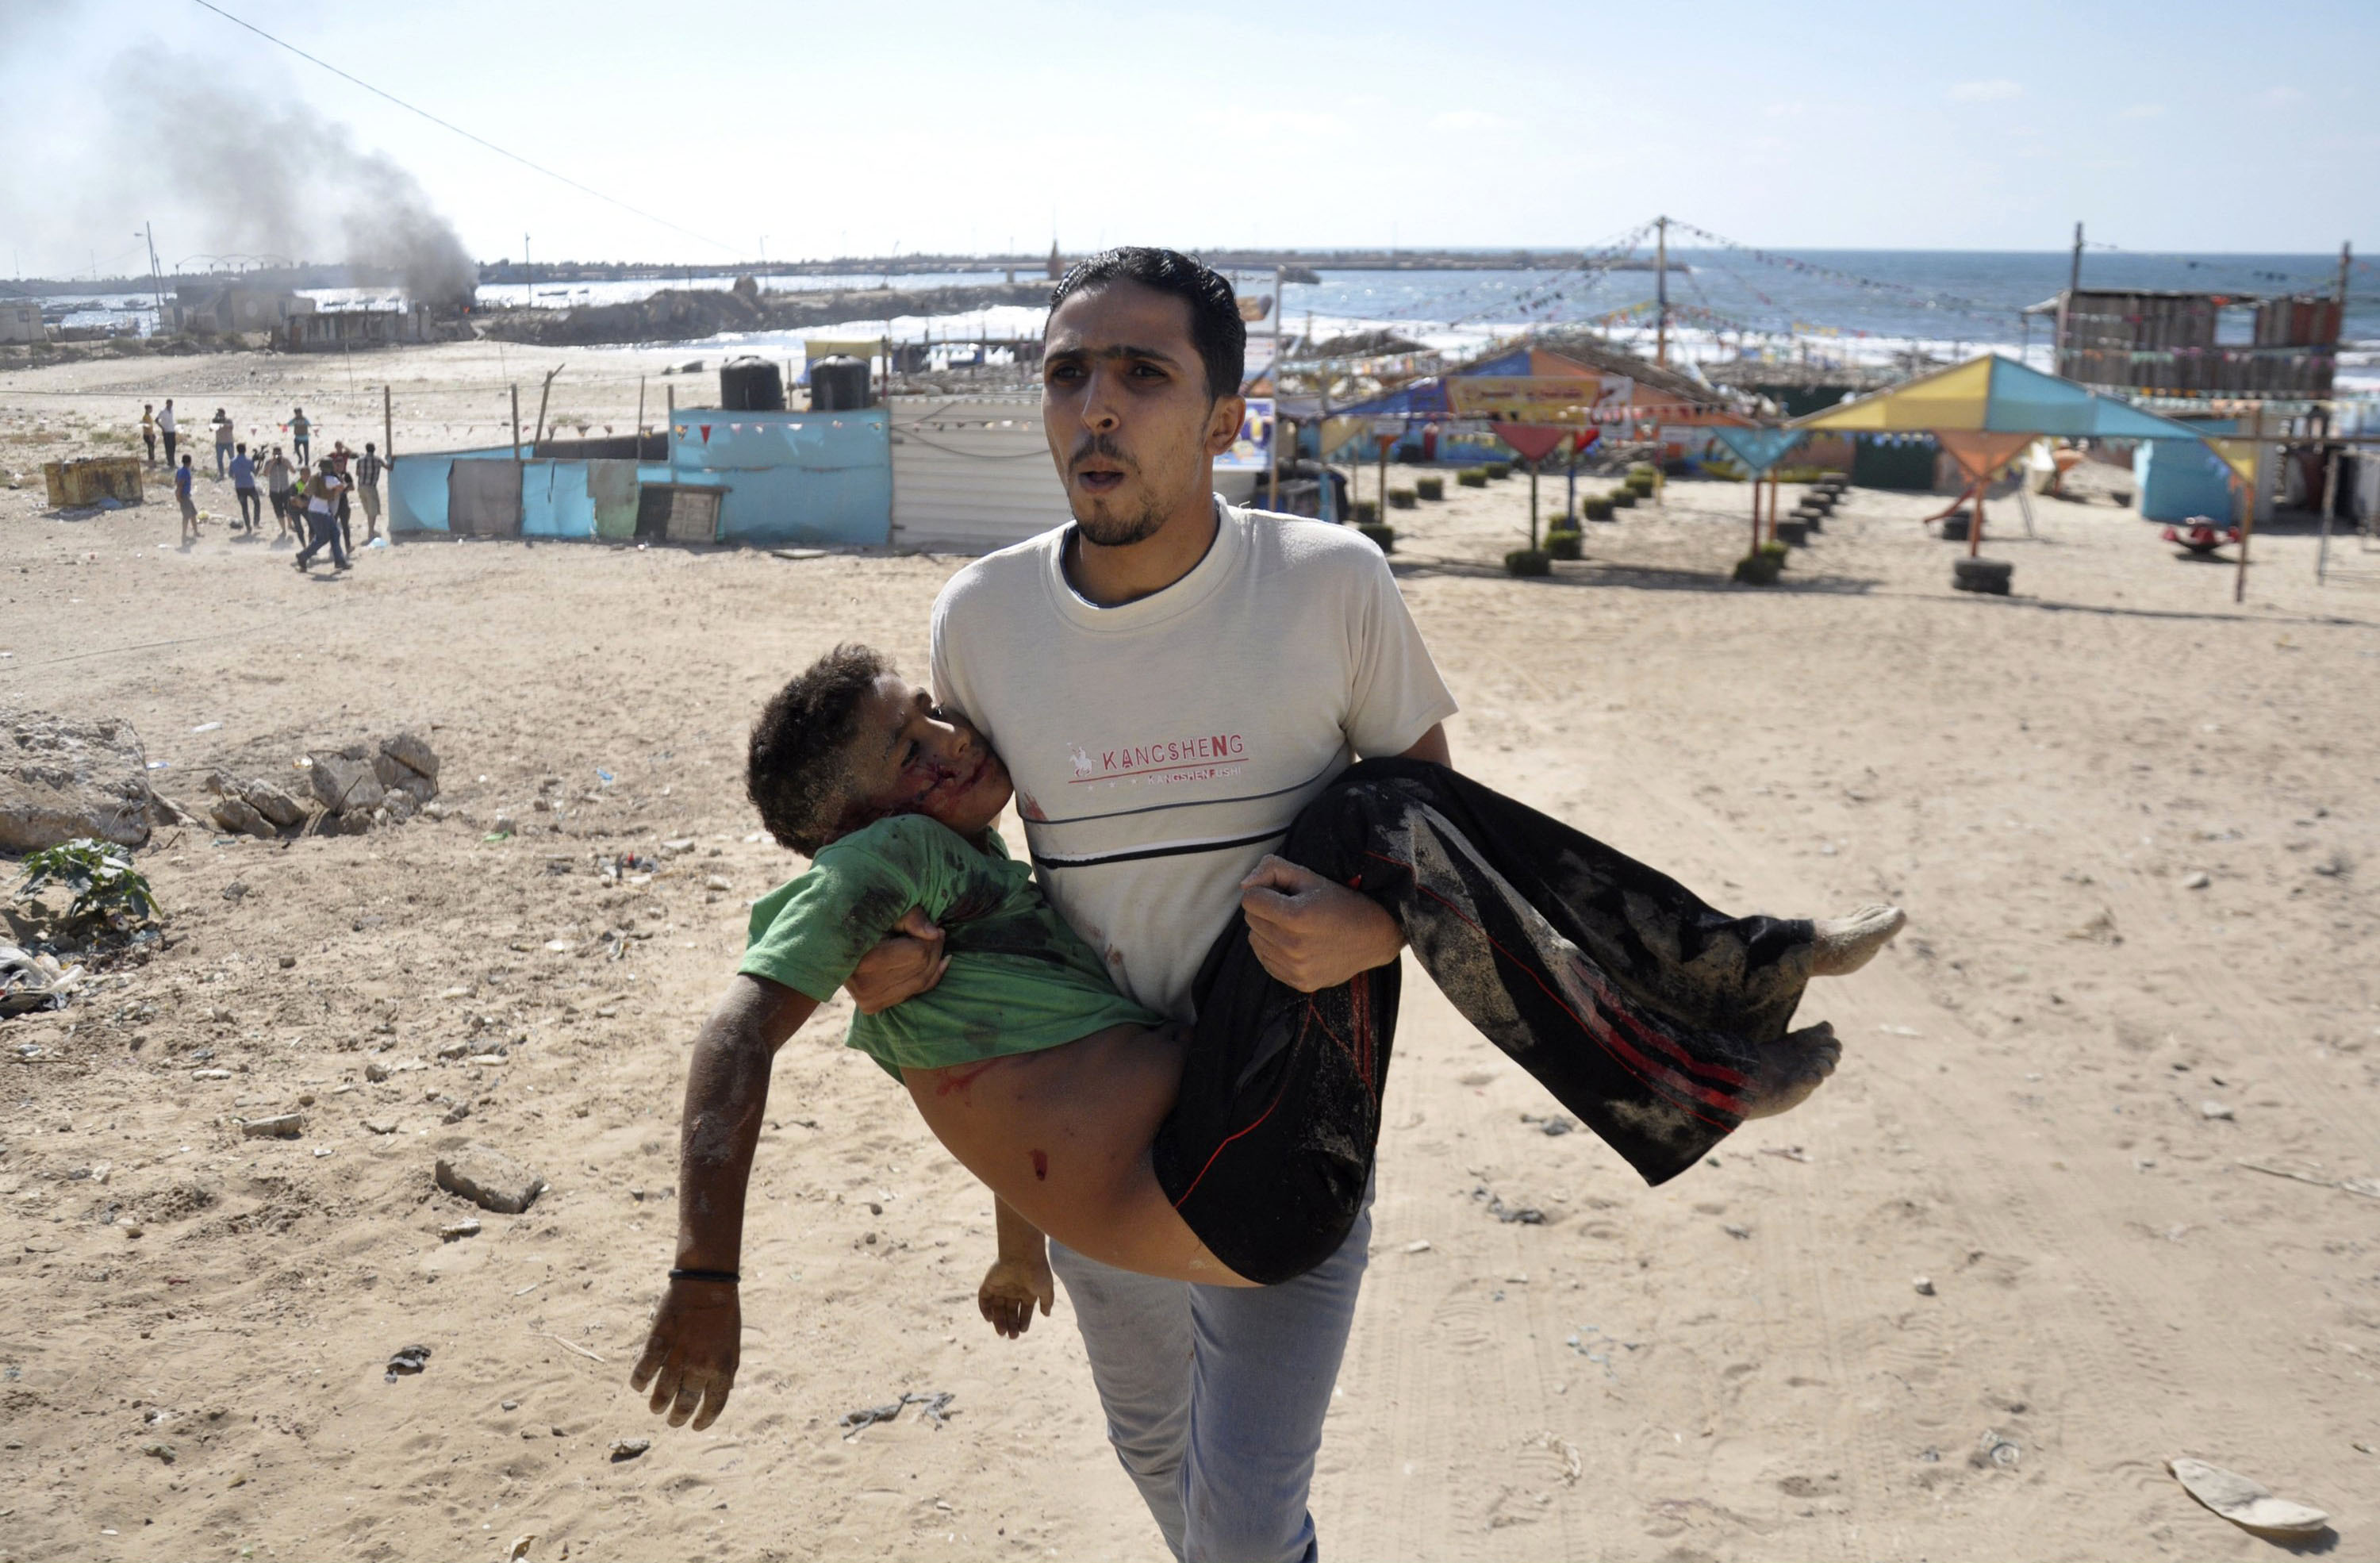 A Palestinian man carries the body of a boy, one of four whom medics say were killed by a shell fired by an Israeli naval gunboat, on a beach in Gaza City. (Mohammed Talatene—Reuters)